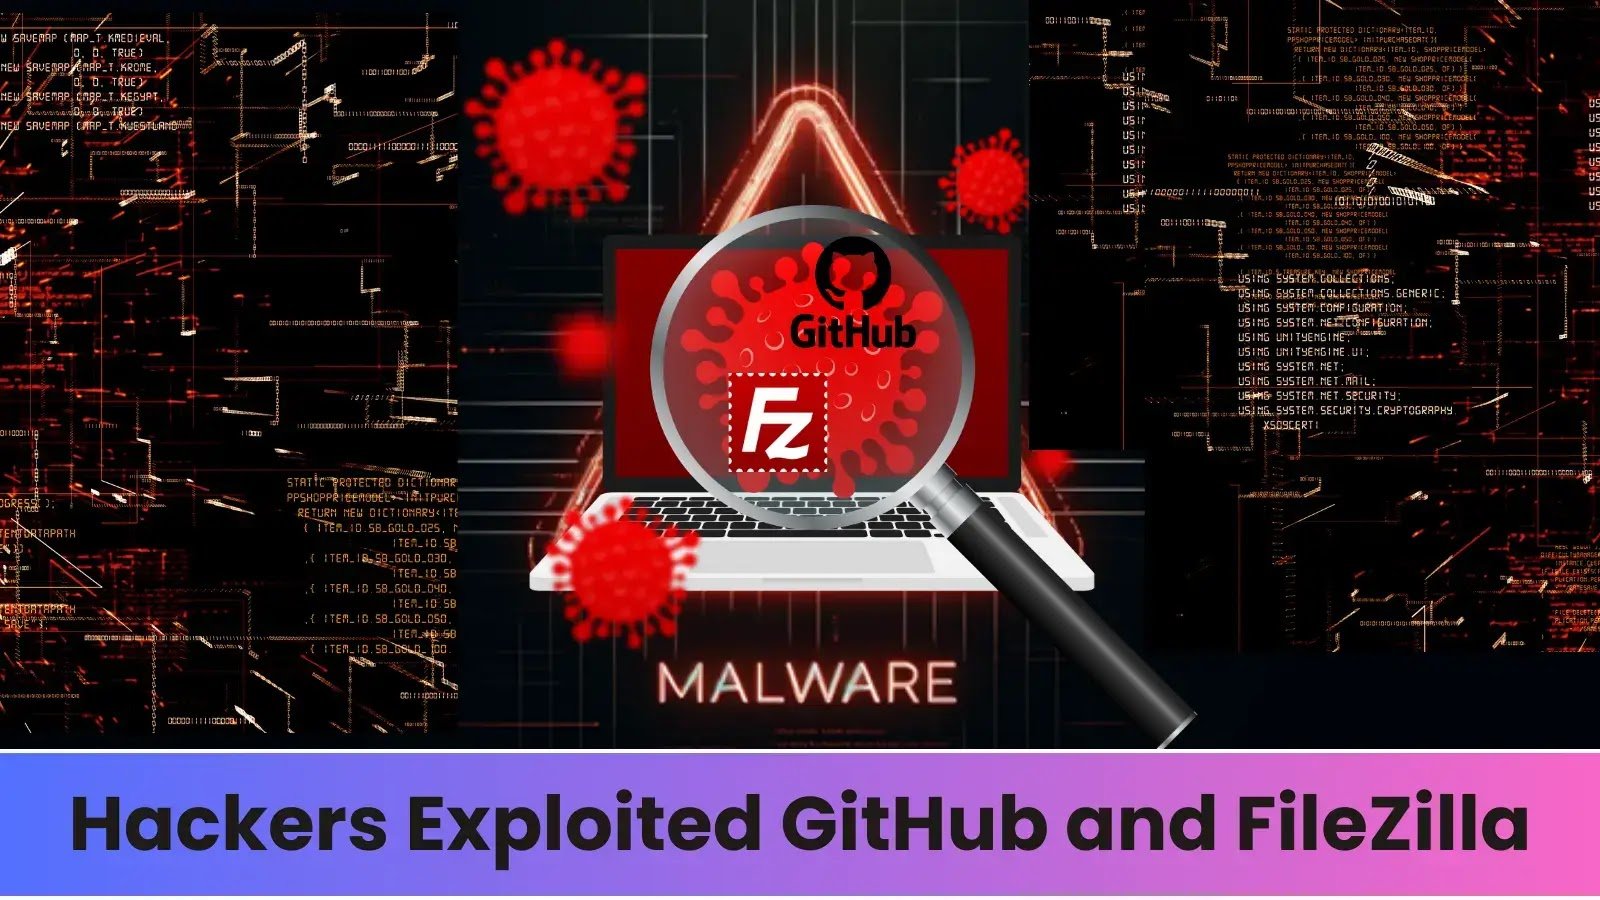 Hackers Exploited GitHub and FileZilla to Deliver Banking Malware